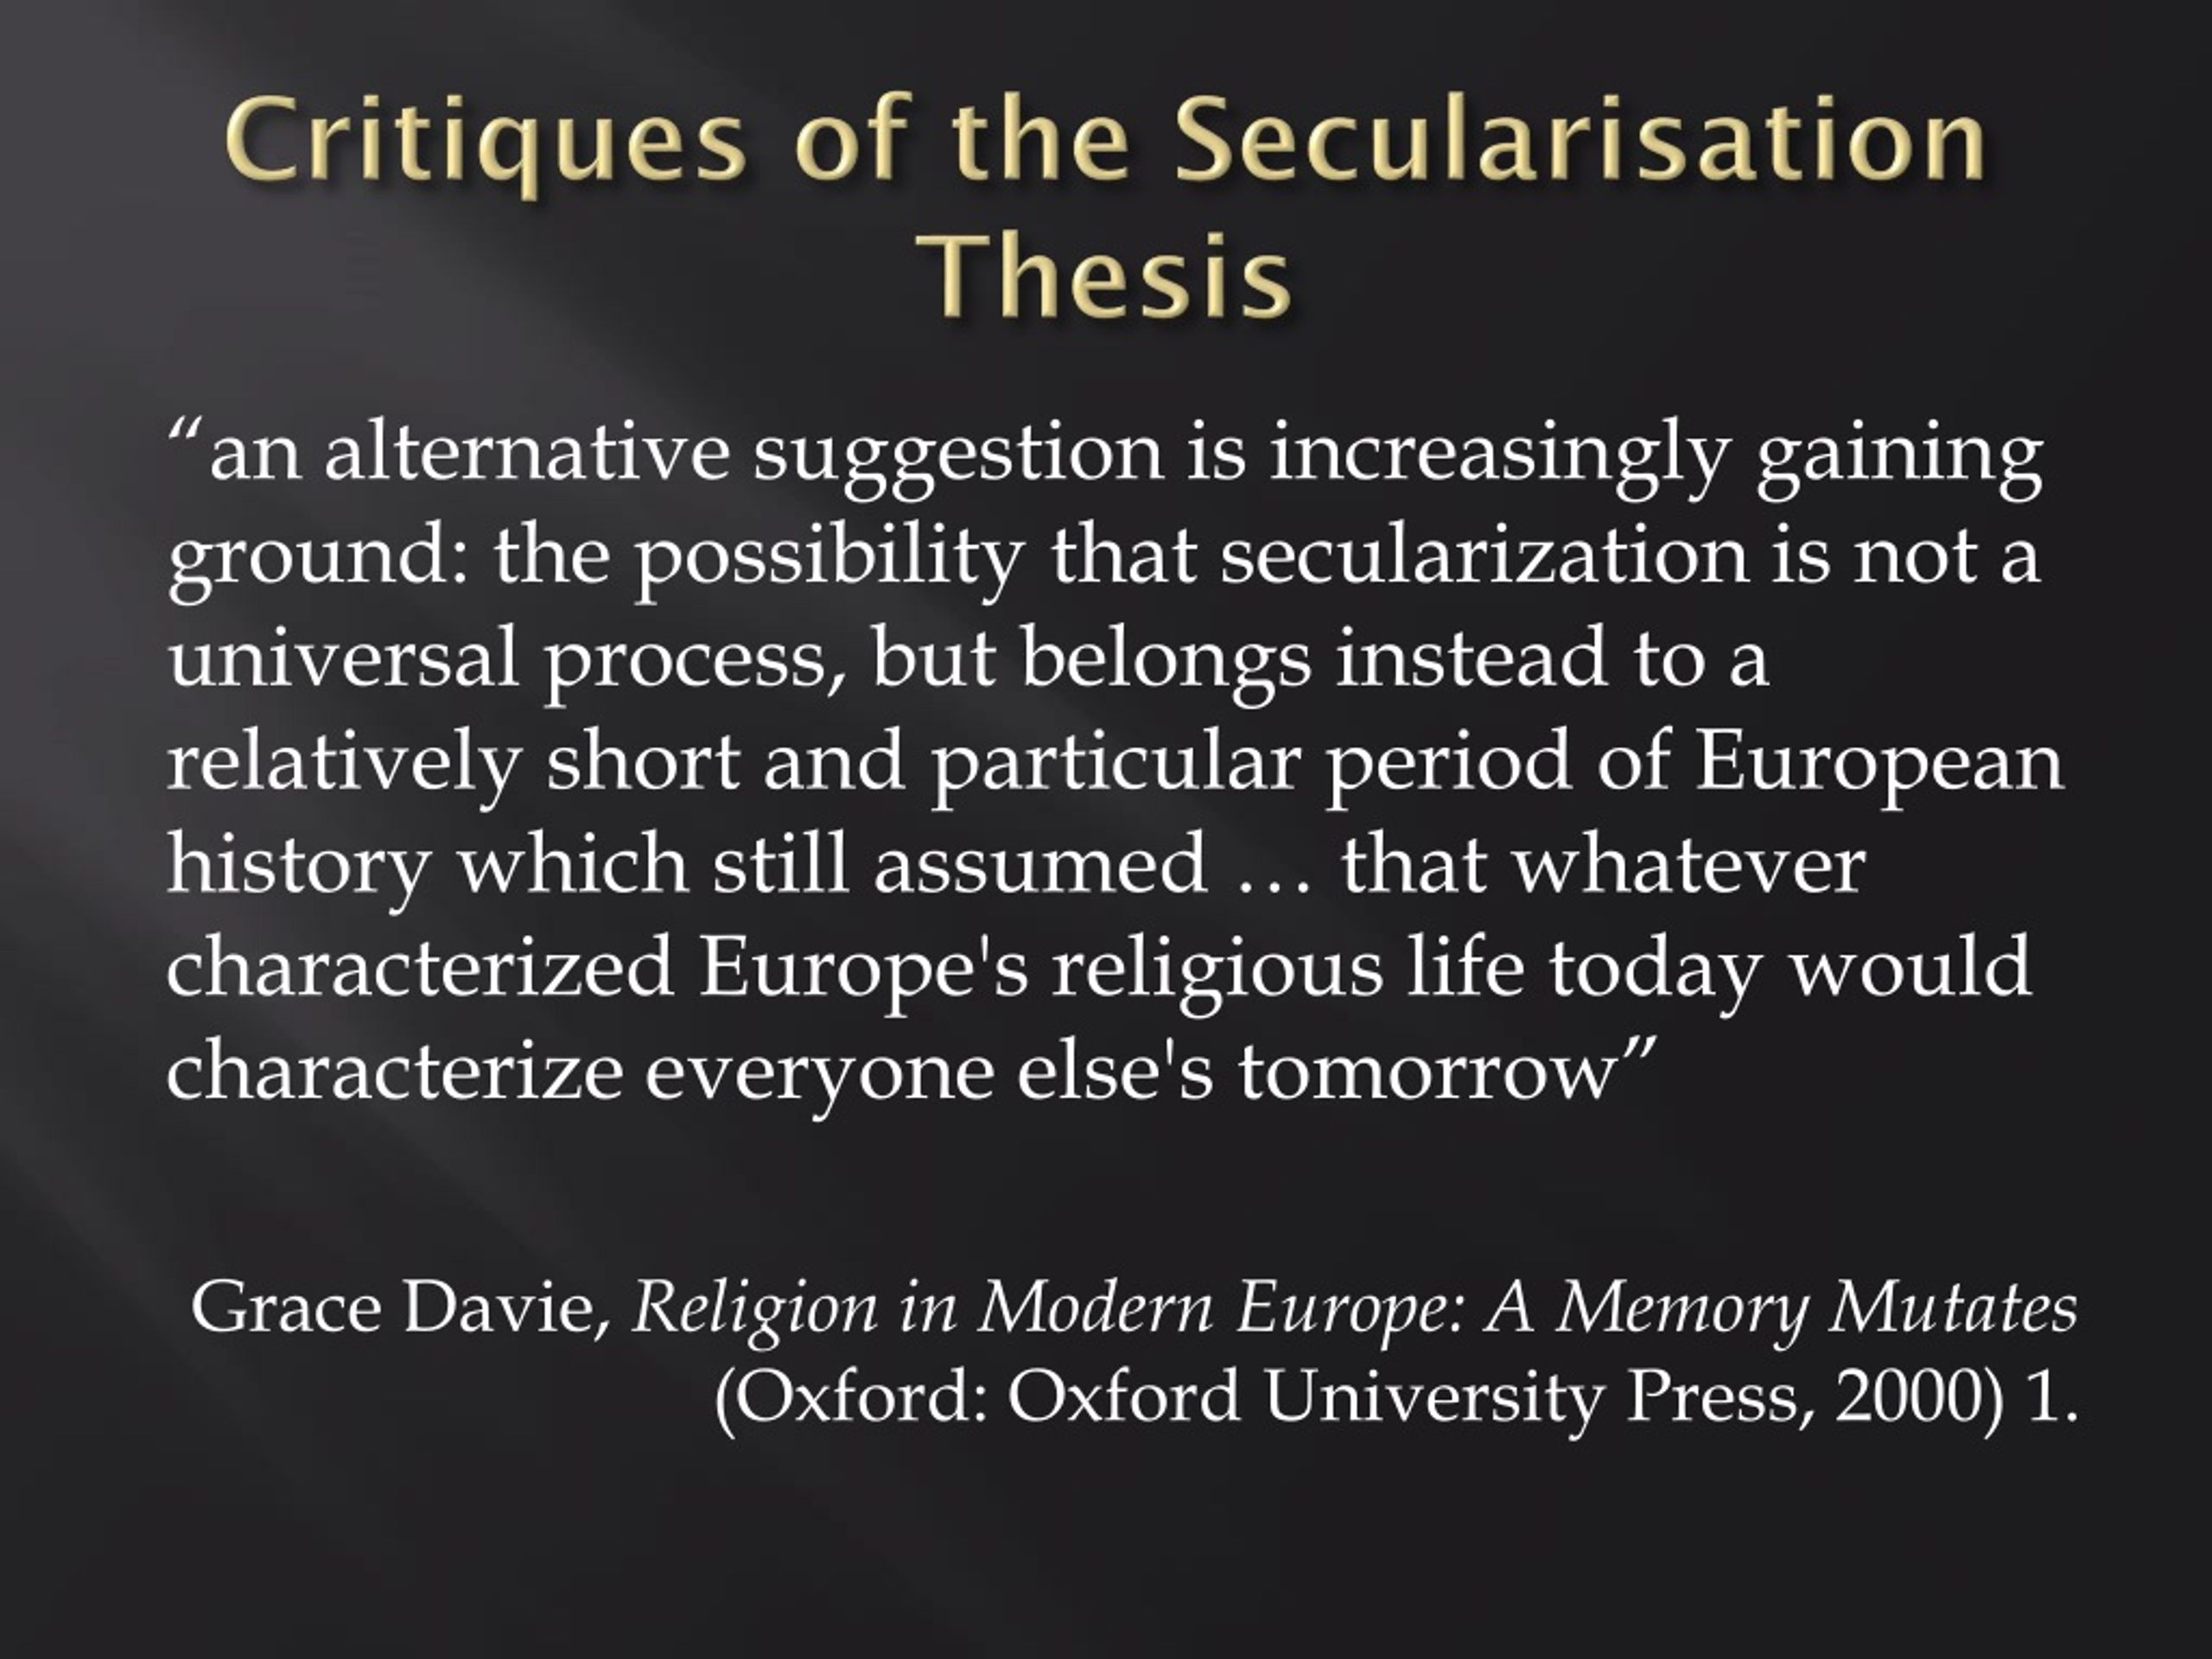 secularization thesis meaning